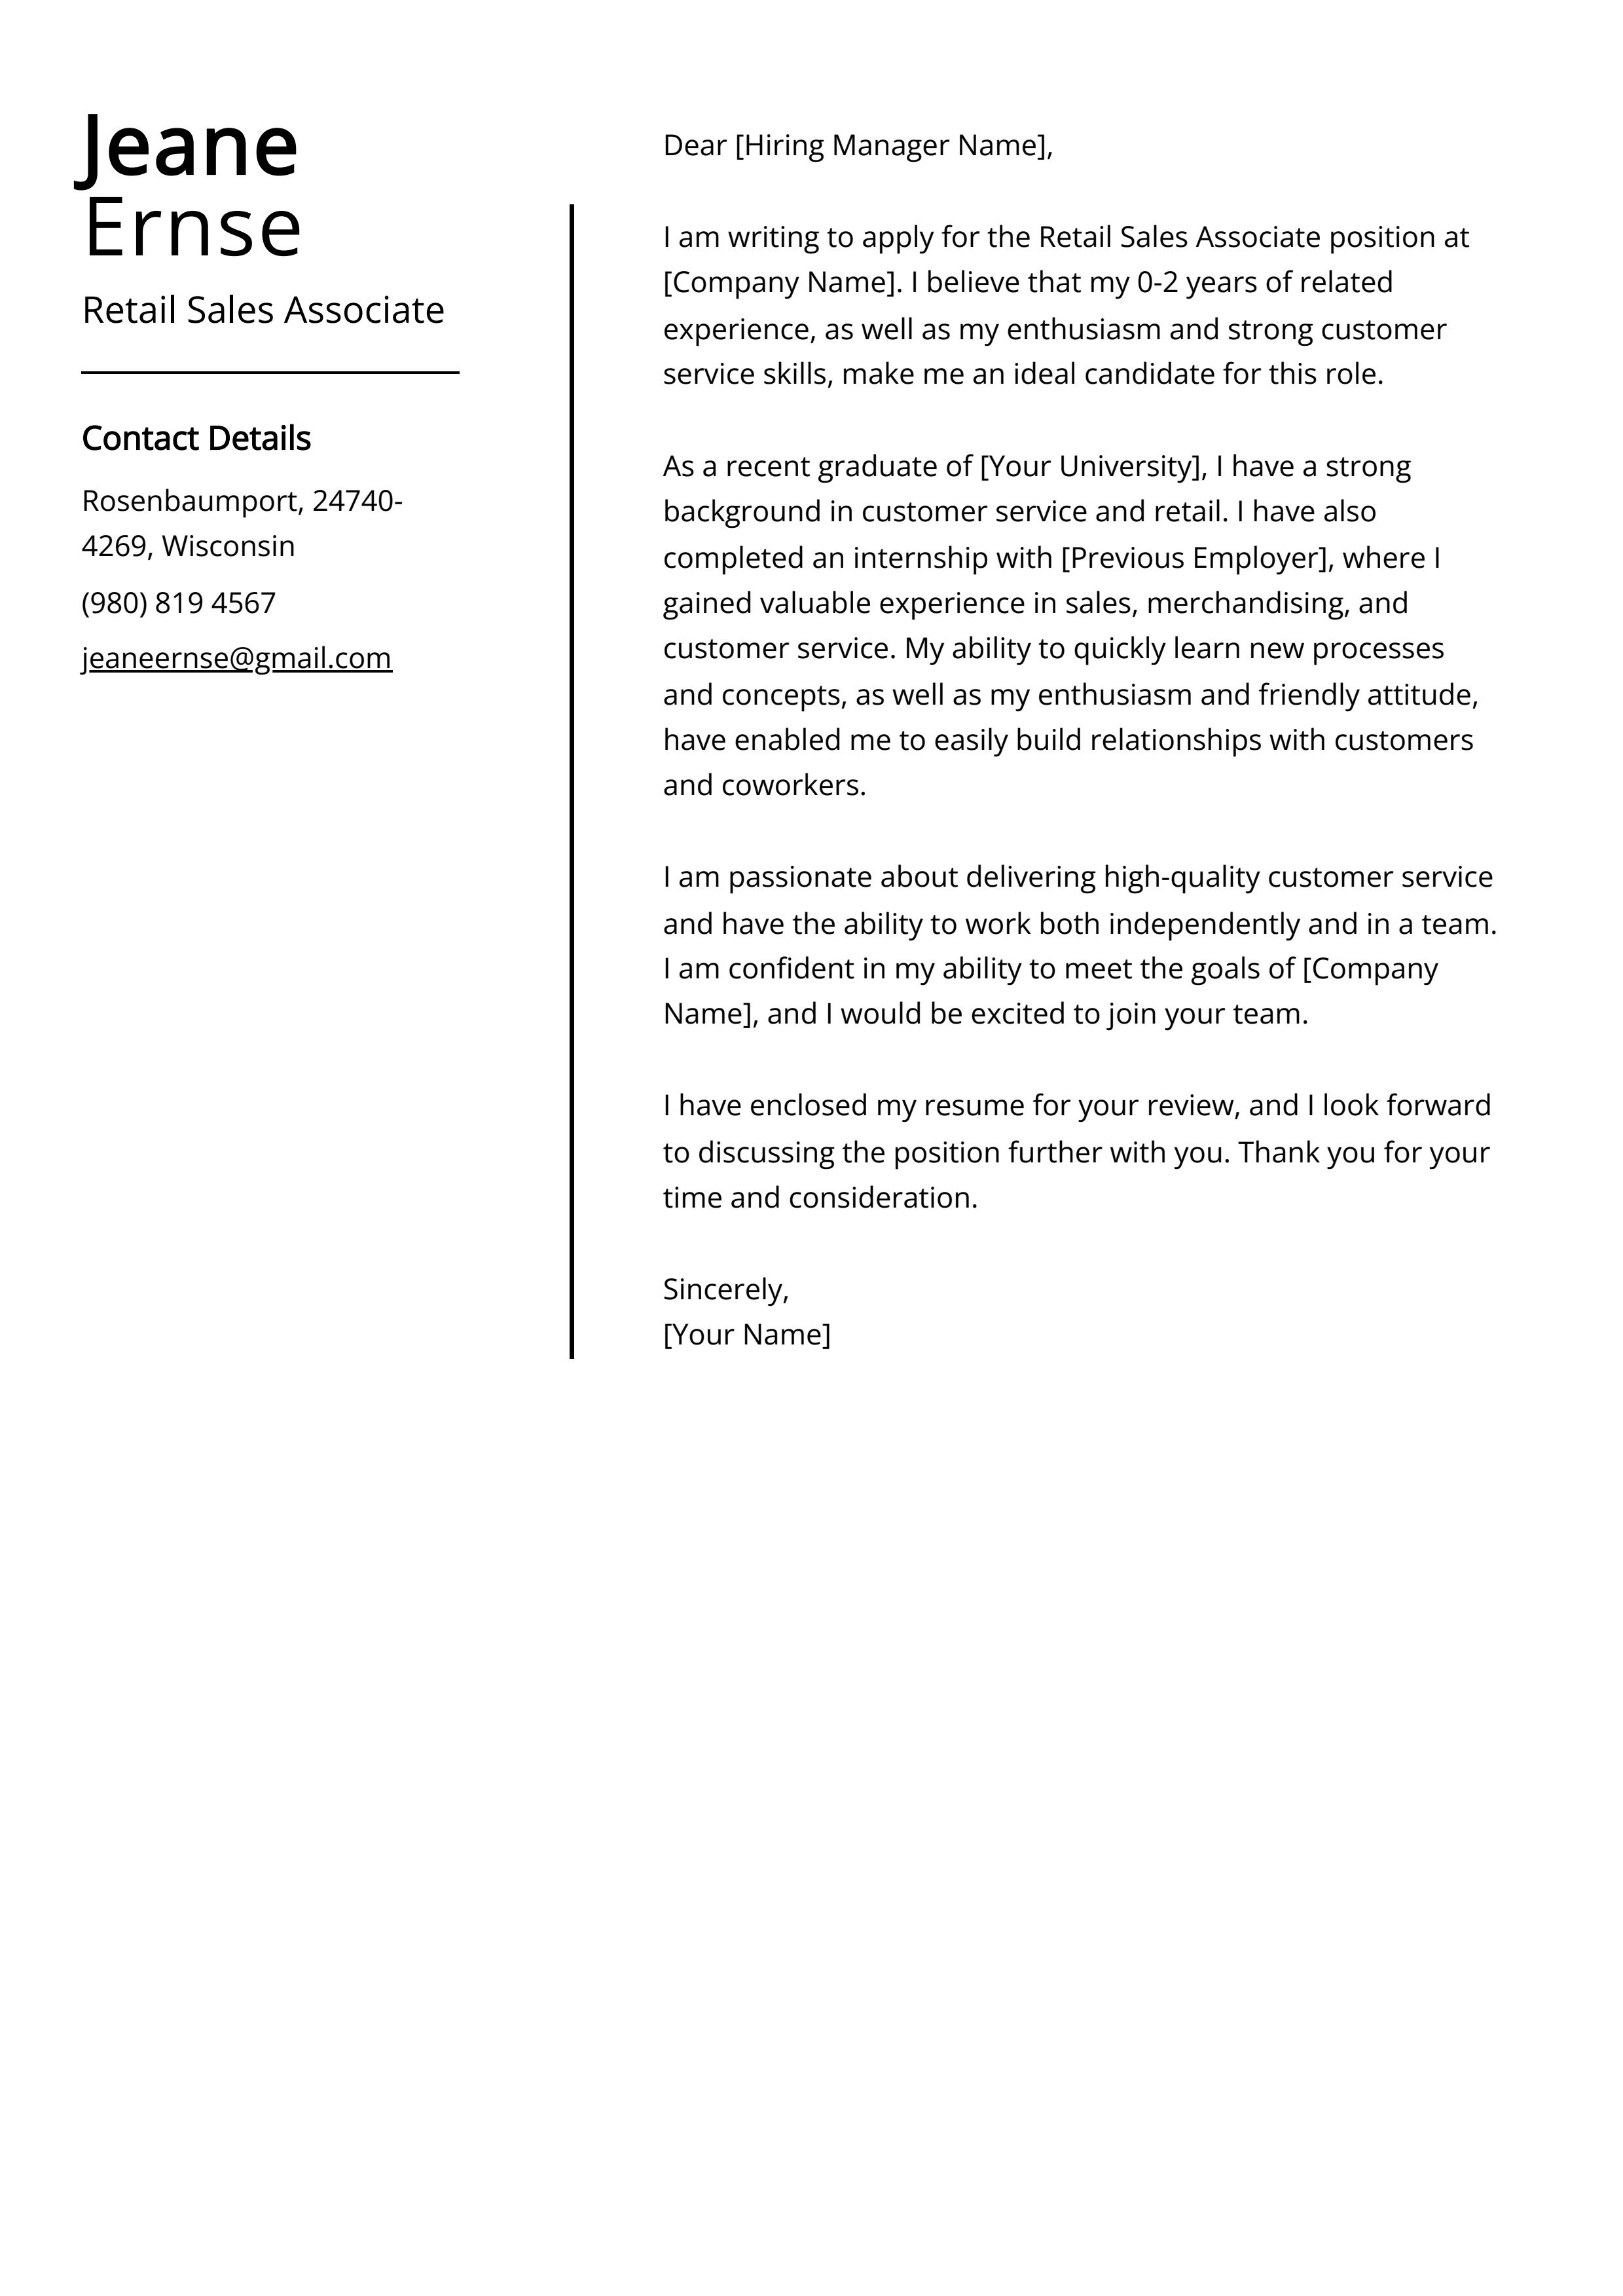 Retail Sales Associate Cover Letter Example